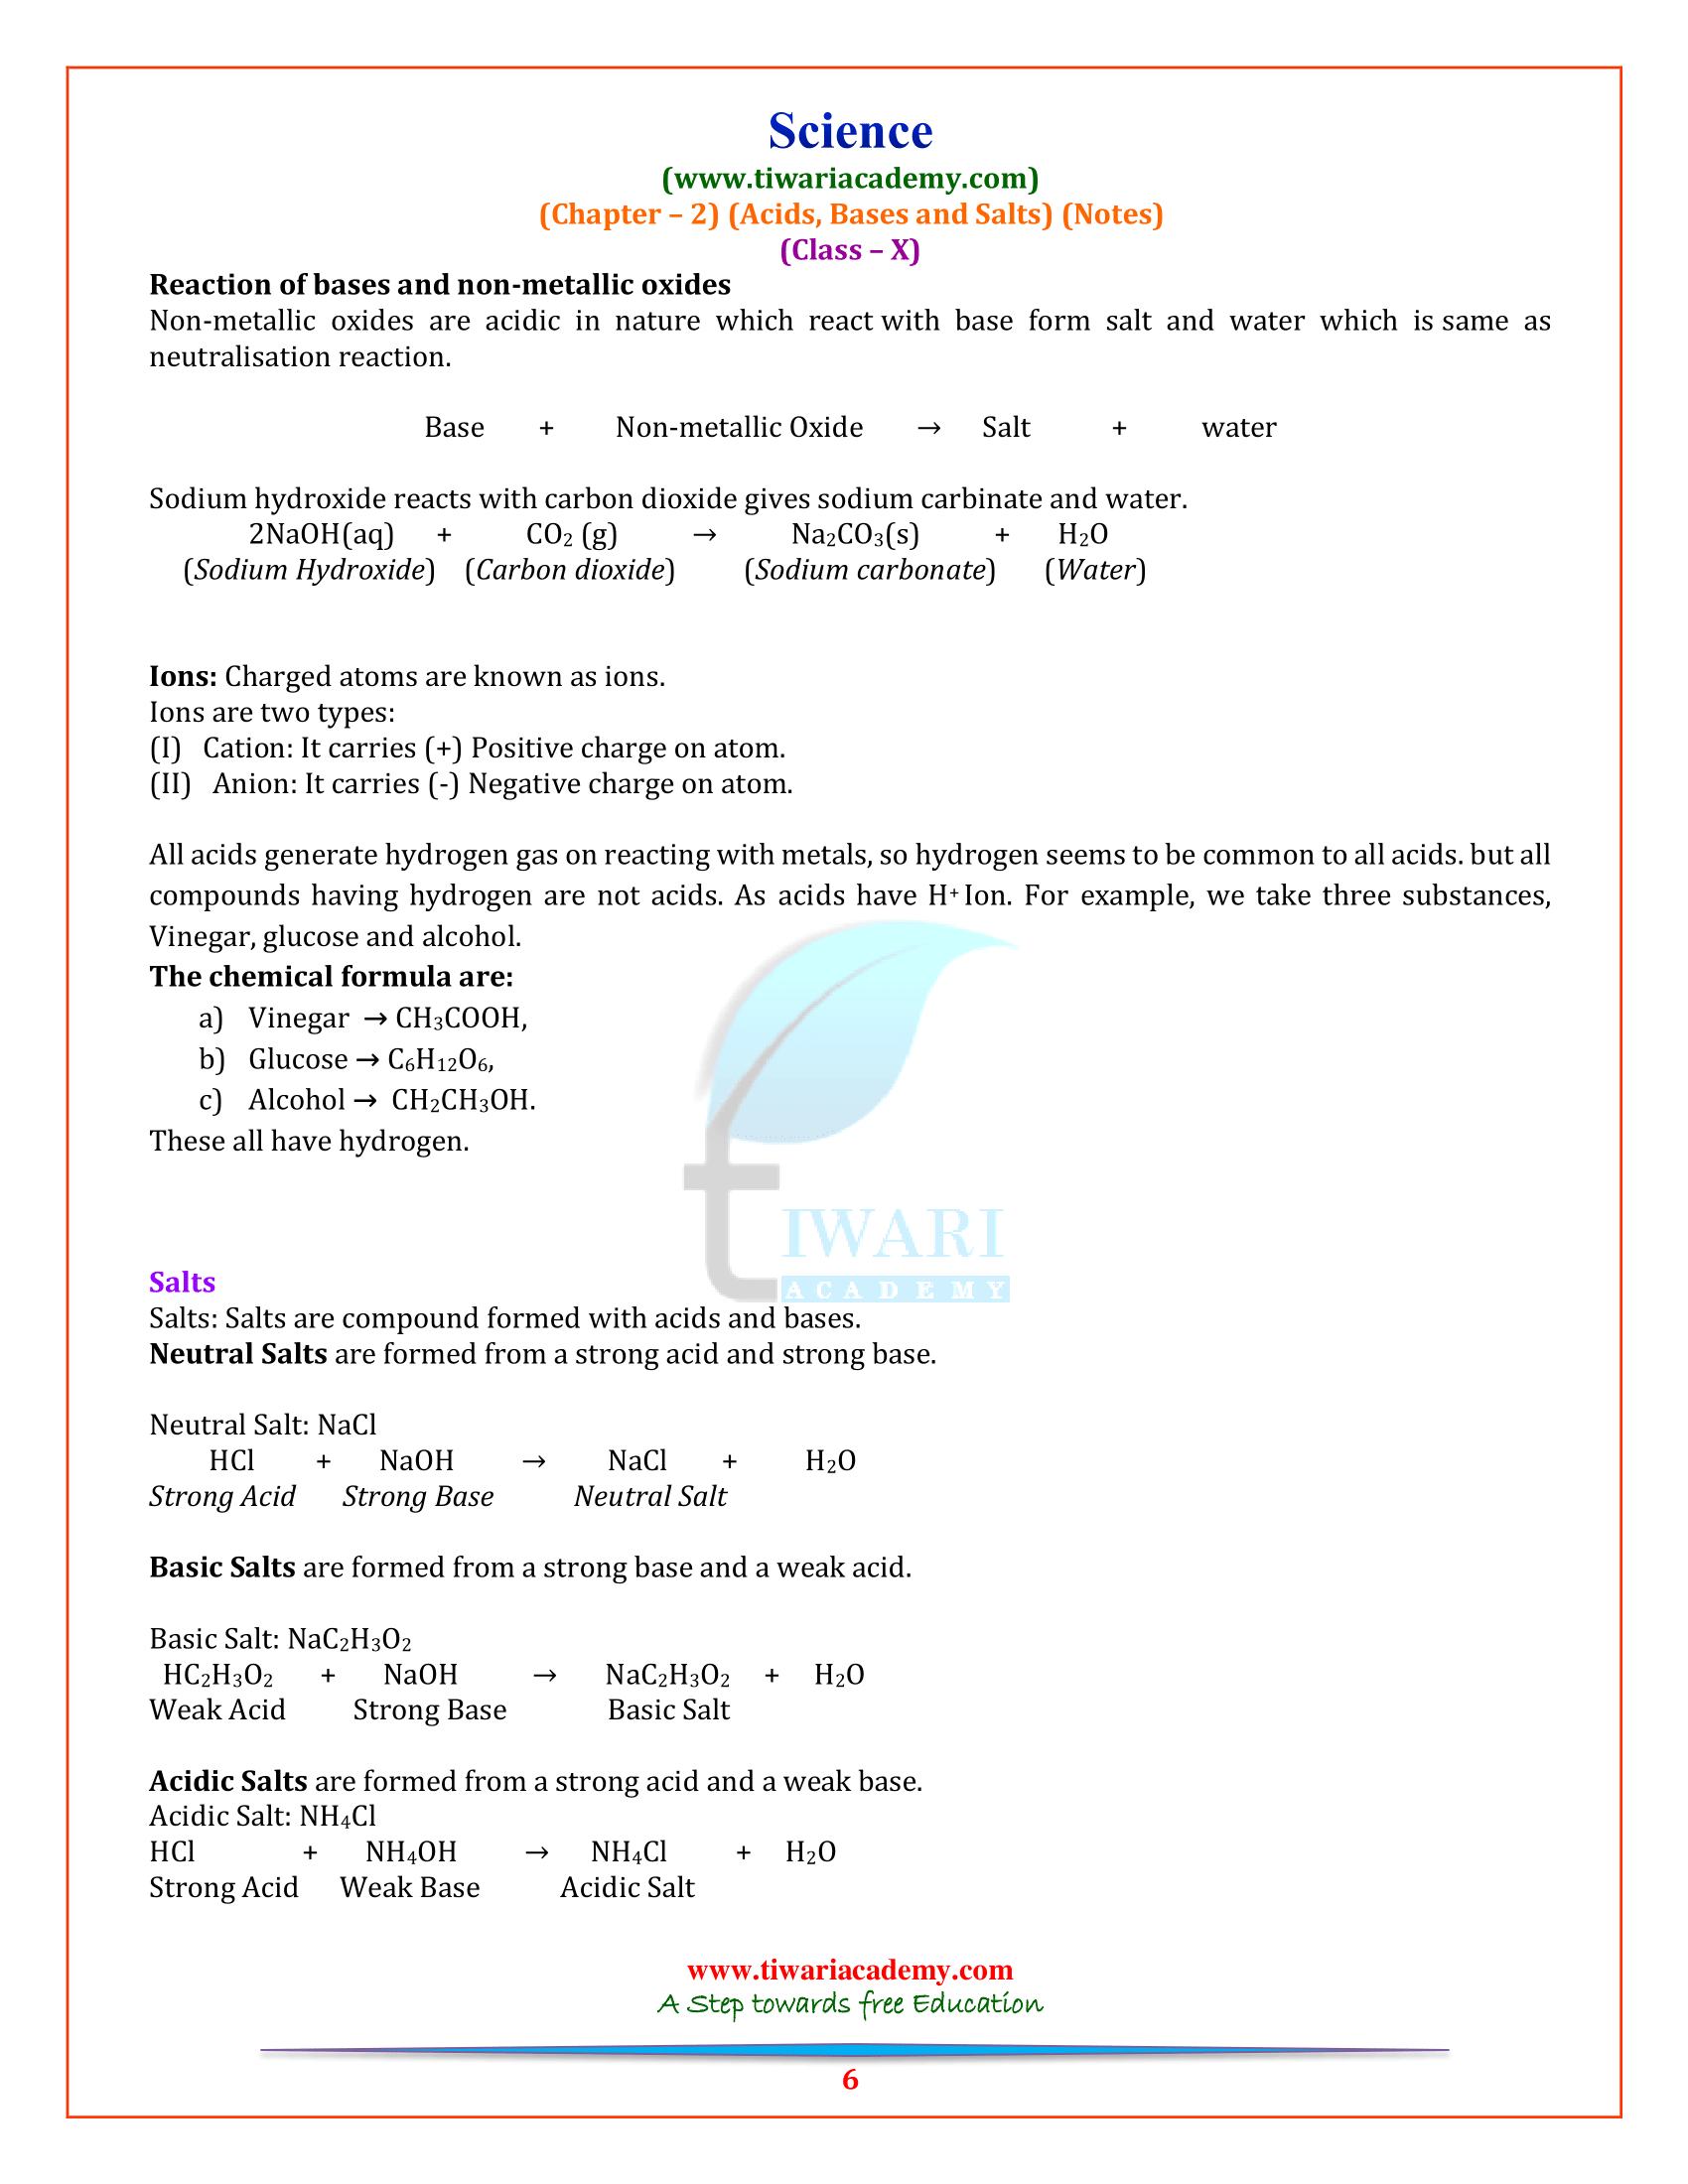 Acids, Bases and Salts notes for 10th science